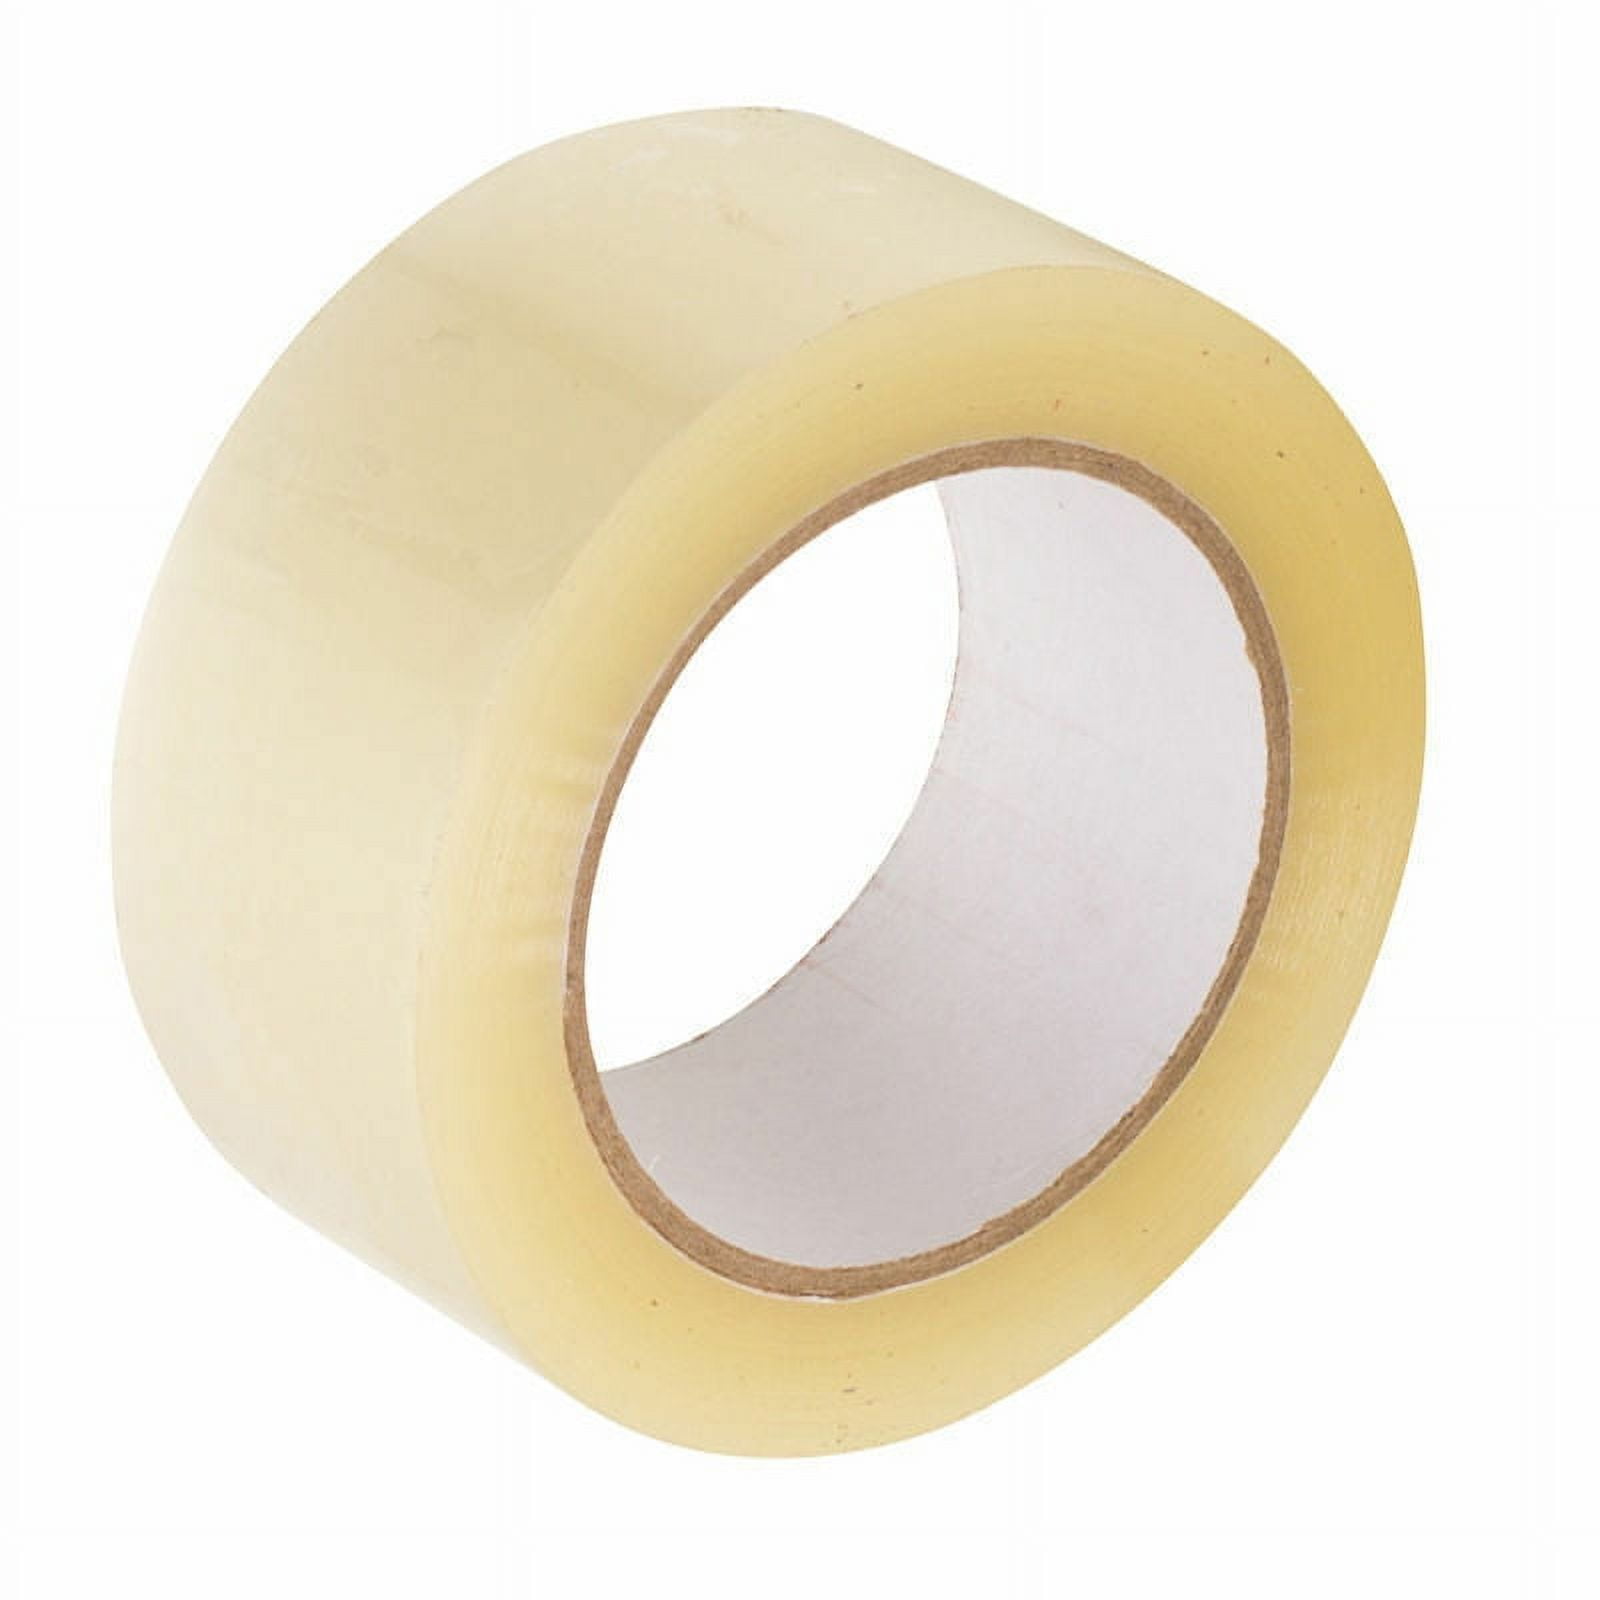 ProPlast Packing Tape - Clear - 2 x 110 yds. - 36 ct.